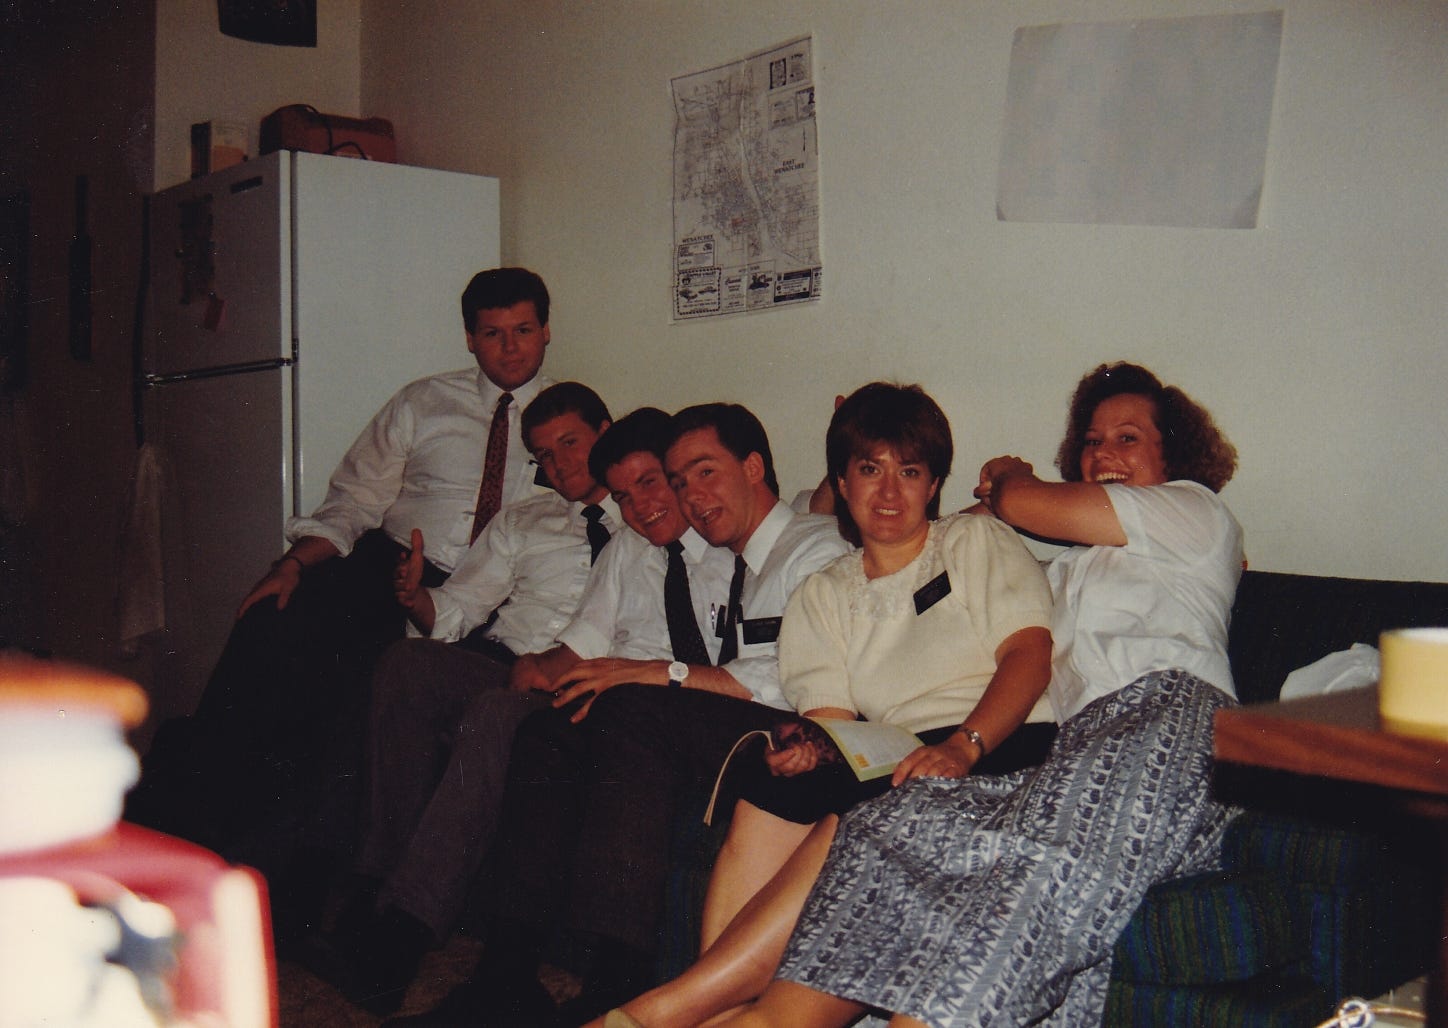 Six Mormon missionaries (four male and two female) are crammed in a row onto a small couch in a messy apartment with a map on the wall behind them.